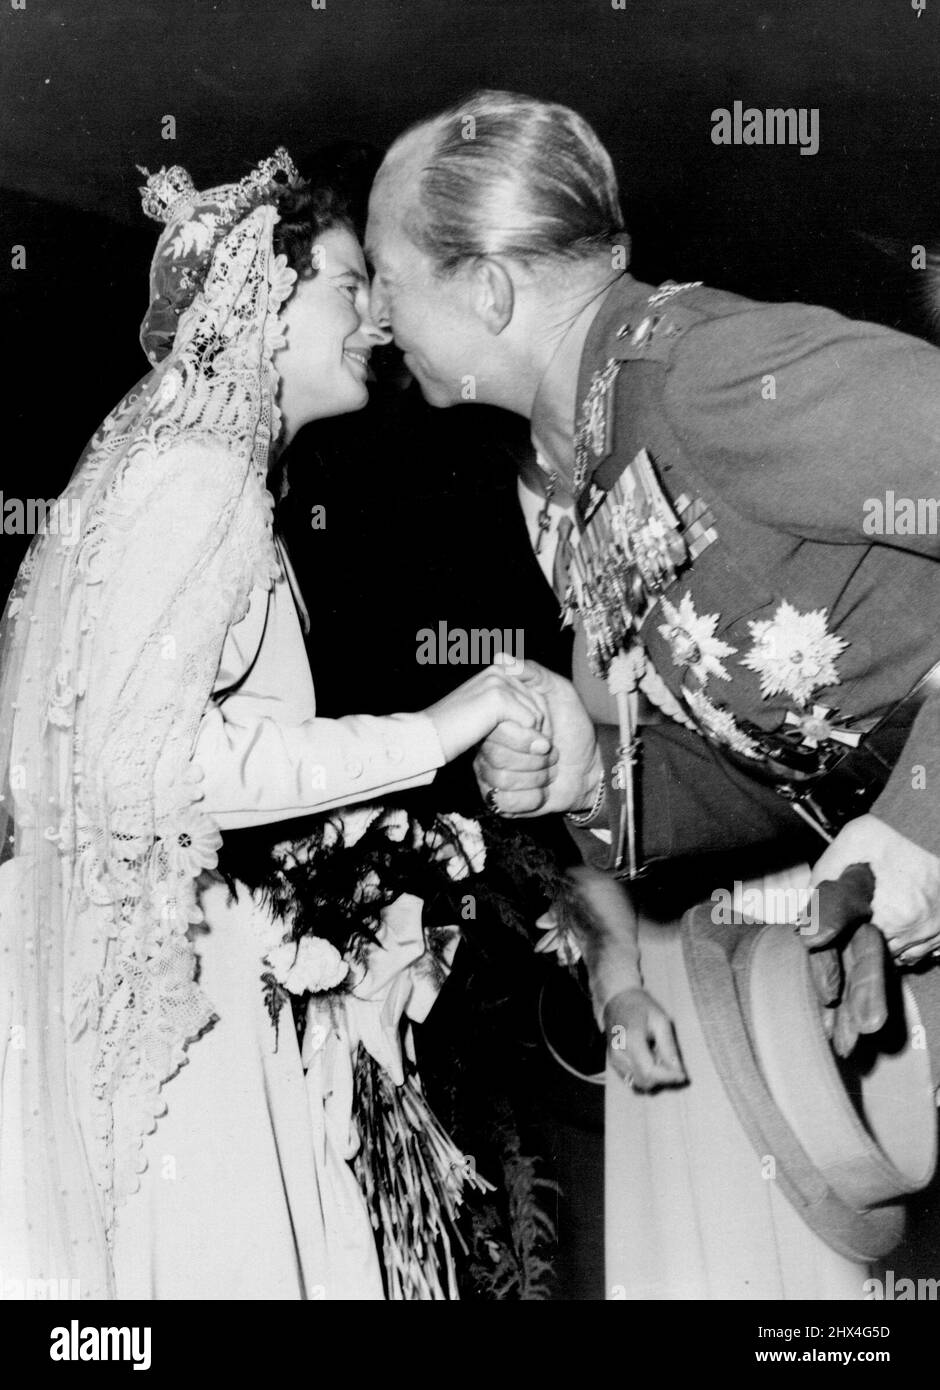 Kiss From A King - King Paul of Greece Kisses the bride at the reception at Schloss Hellenhausen after the ceremony. Wearing the wedding veil of the last German Emoress, Princess Ortrud Von Glueckburg - who married Prince Ernest August Von Hanover at Marienburg Castle in a civil ceremony last week - went through the church ceremony with her husband here. The King and Queen of Greece were guests at the ceremony at the bomb-damaged market church. September 6, 1951. Stock Photo